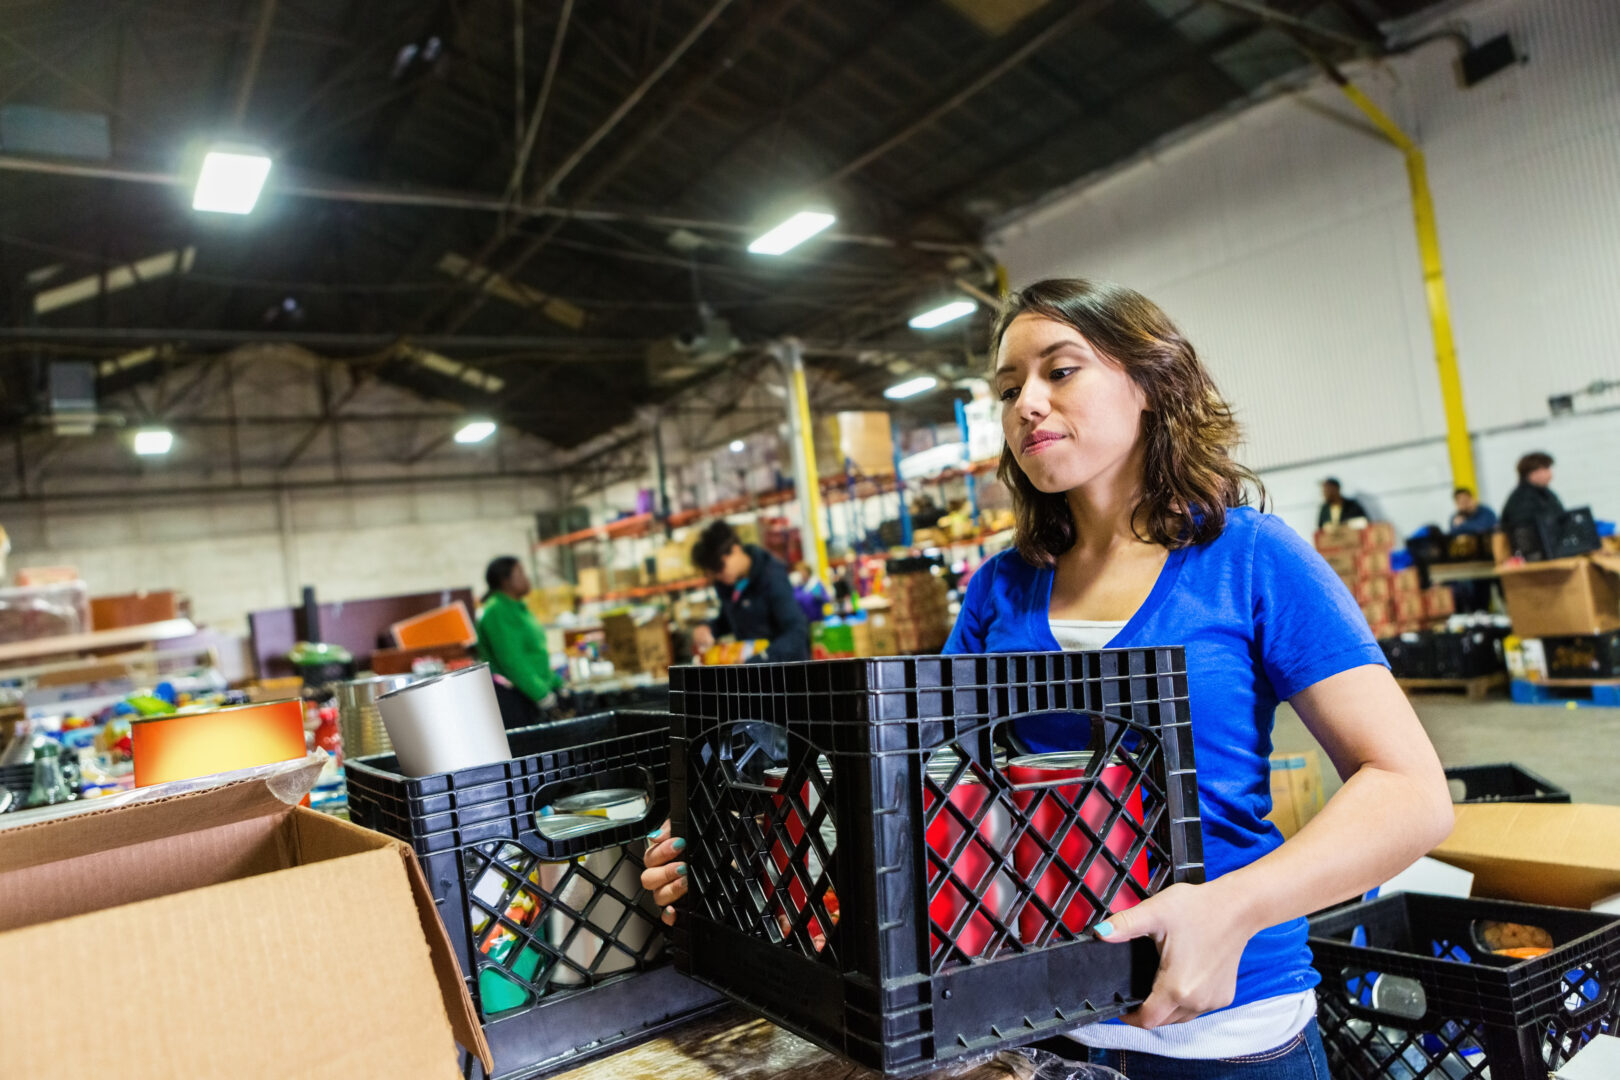 A young woman volunteers to organize donations at a large food bank